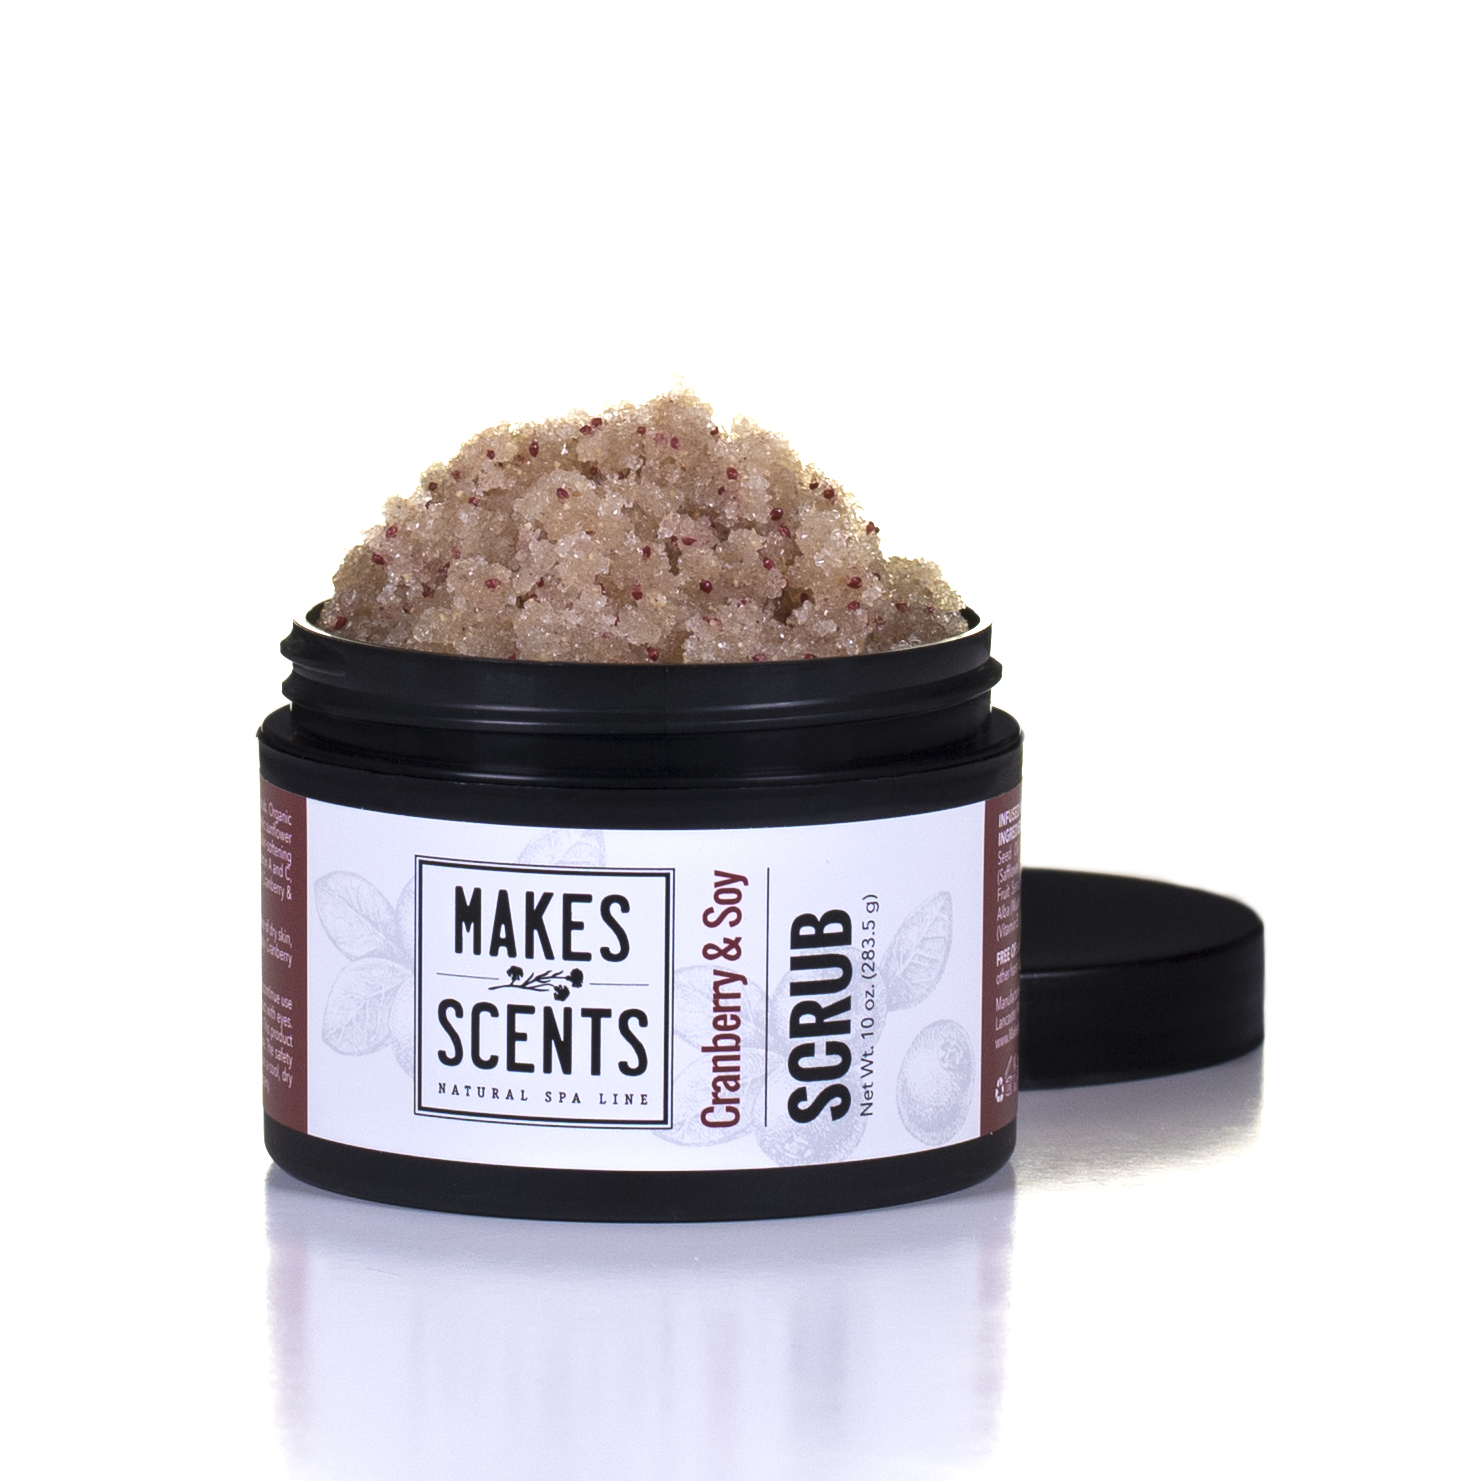 Cranberry Soy Body Scrub | Makes Scents Natural Spa Line